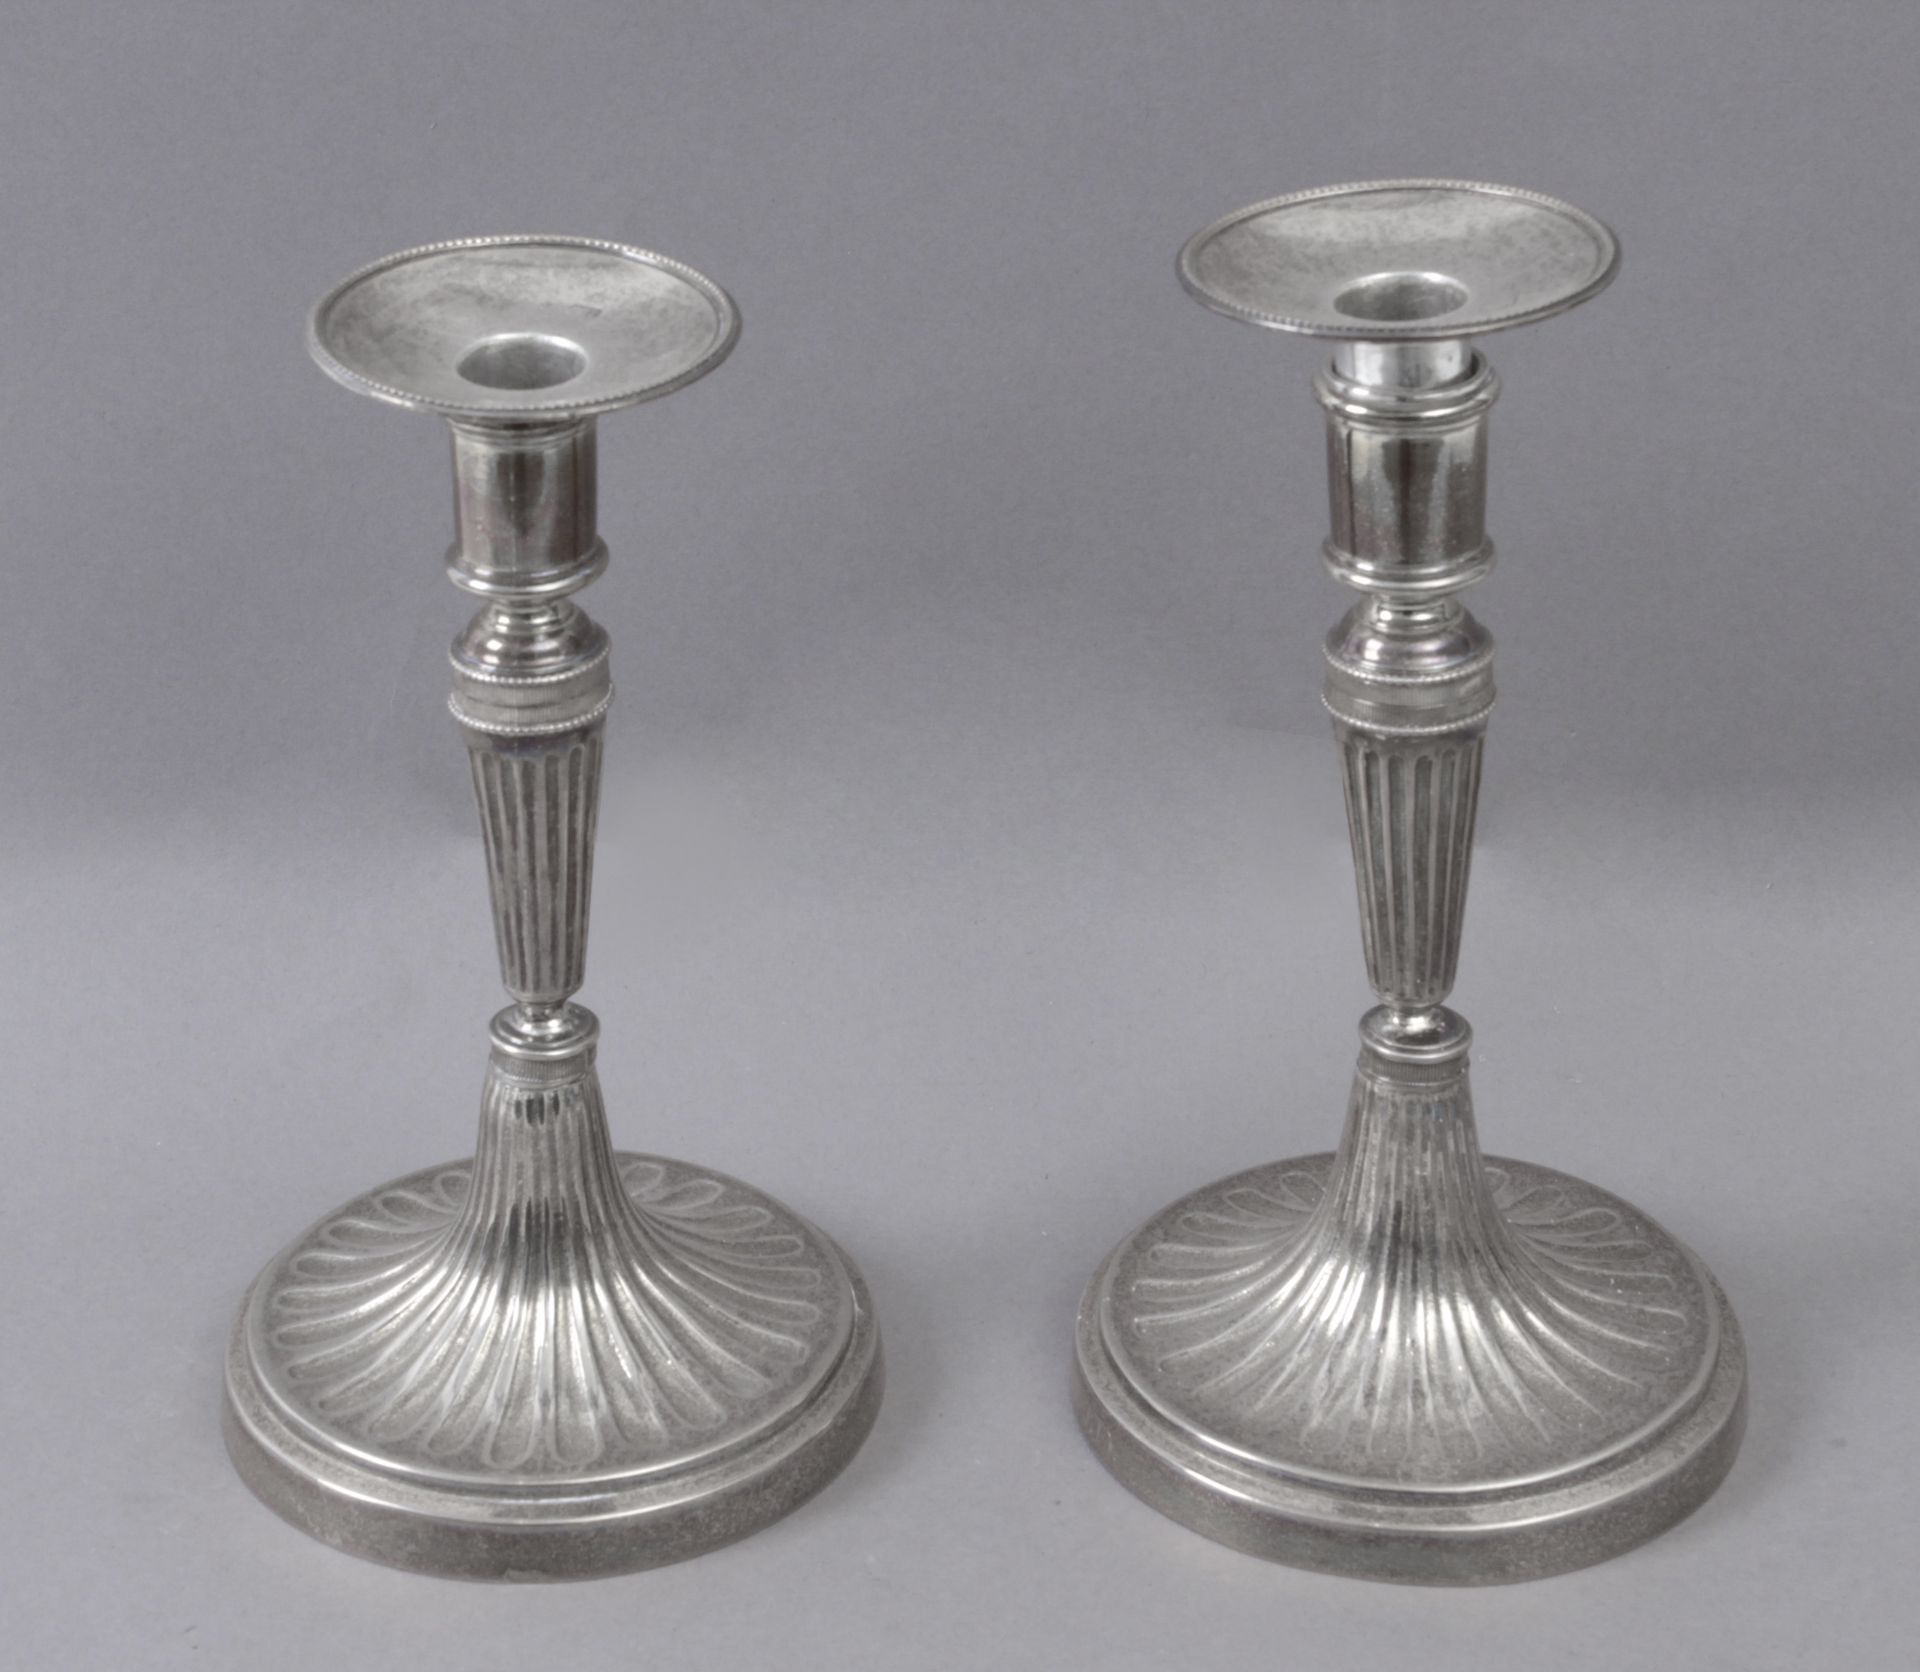 A pair of silver candlesticks 1891, with hallmarks from Madrid